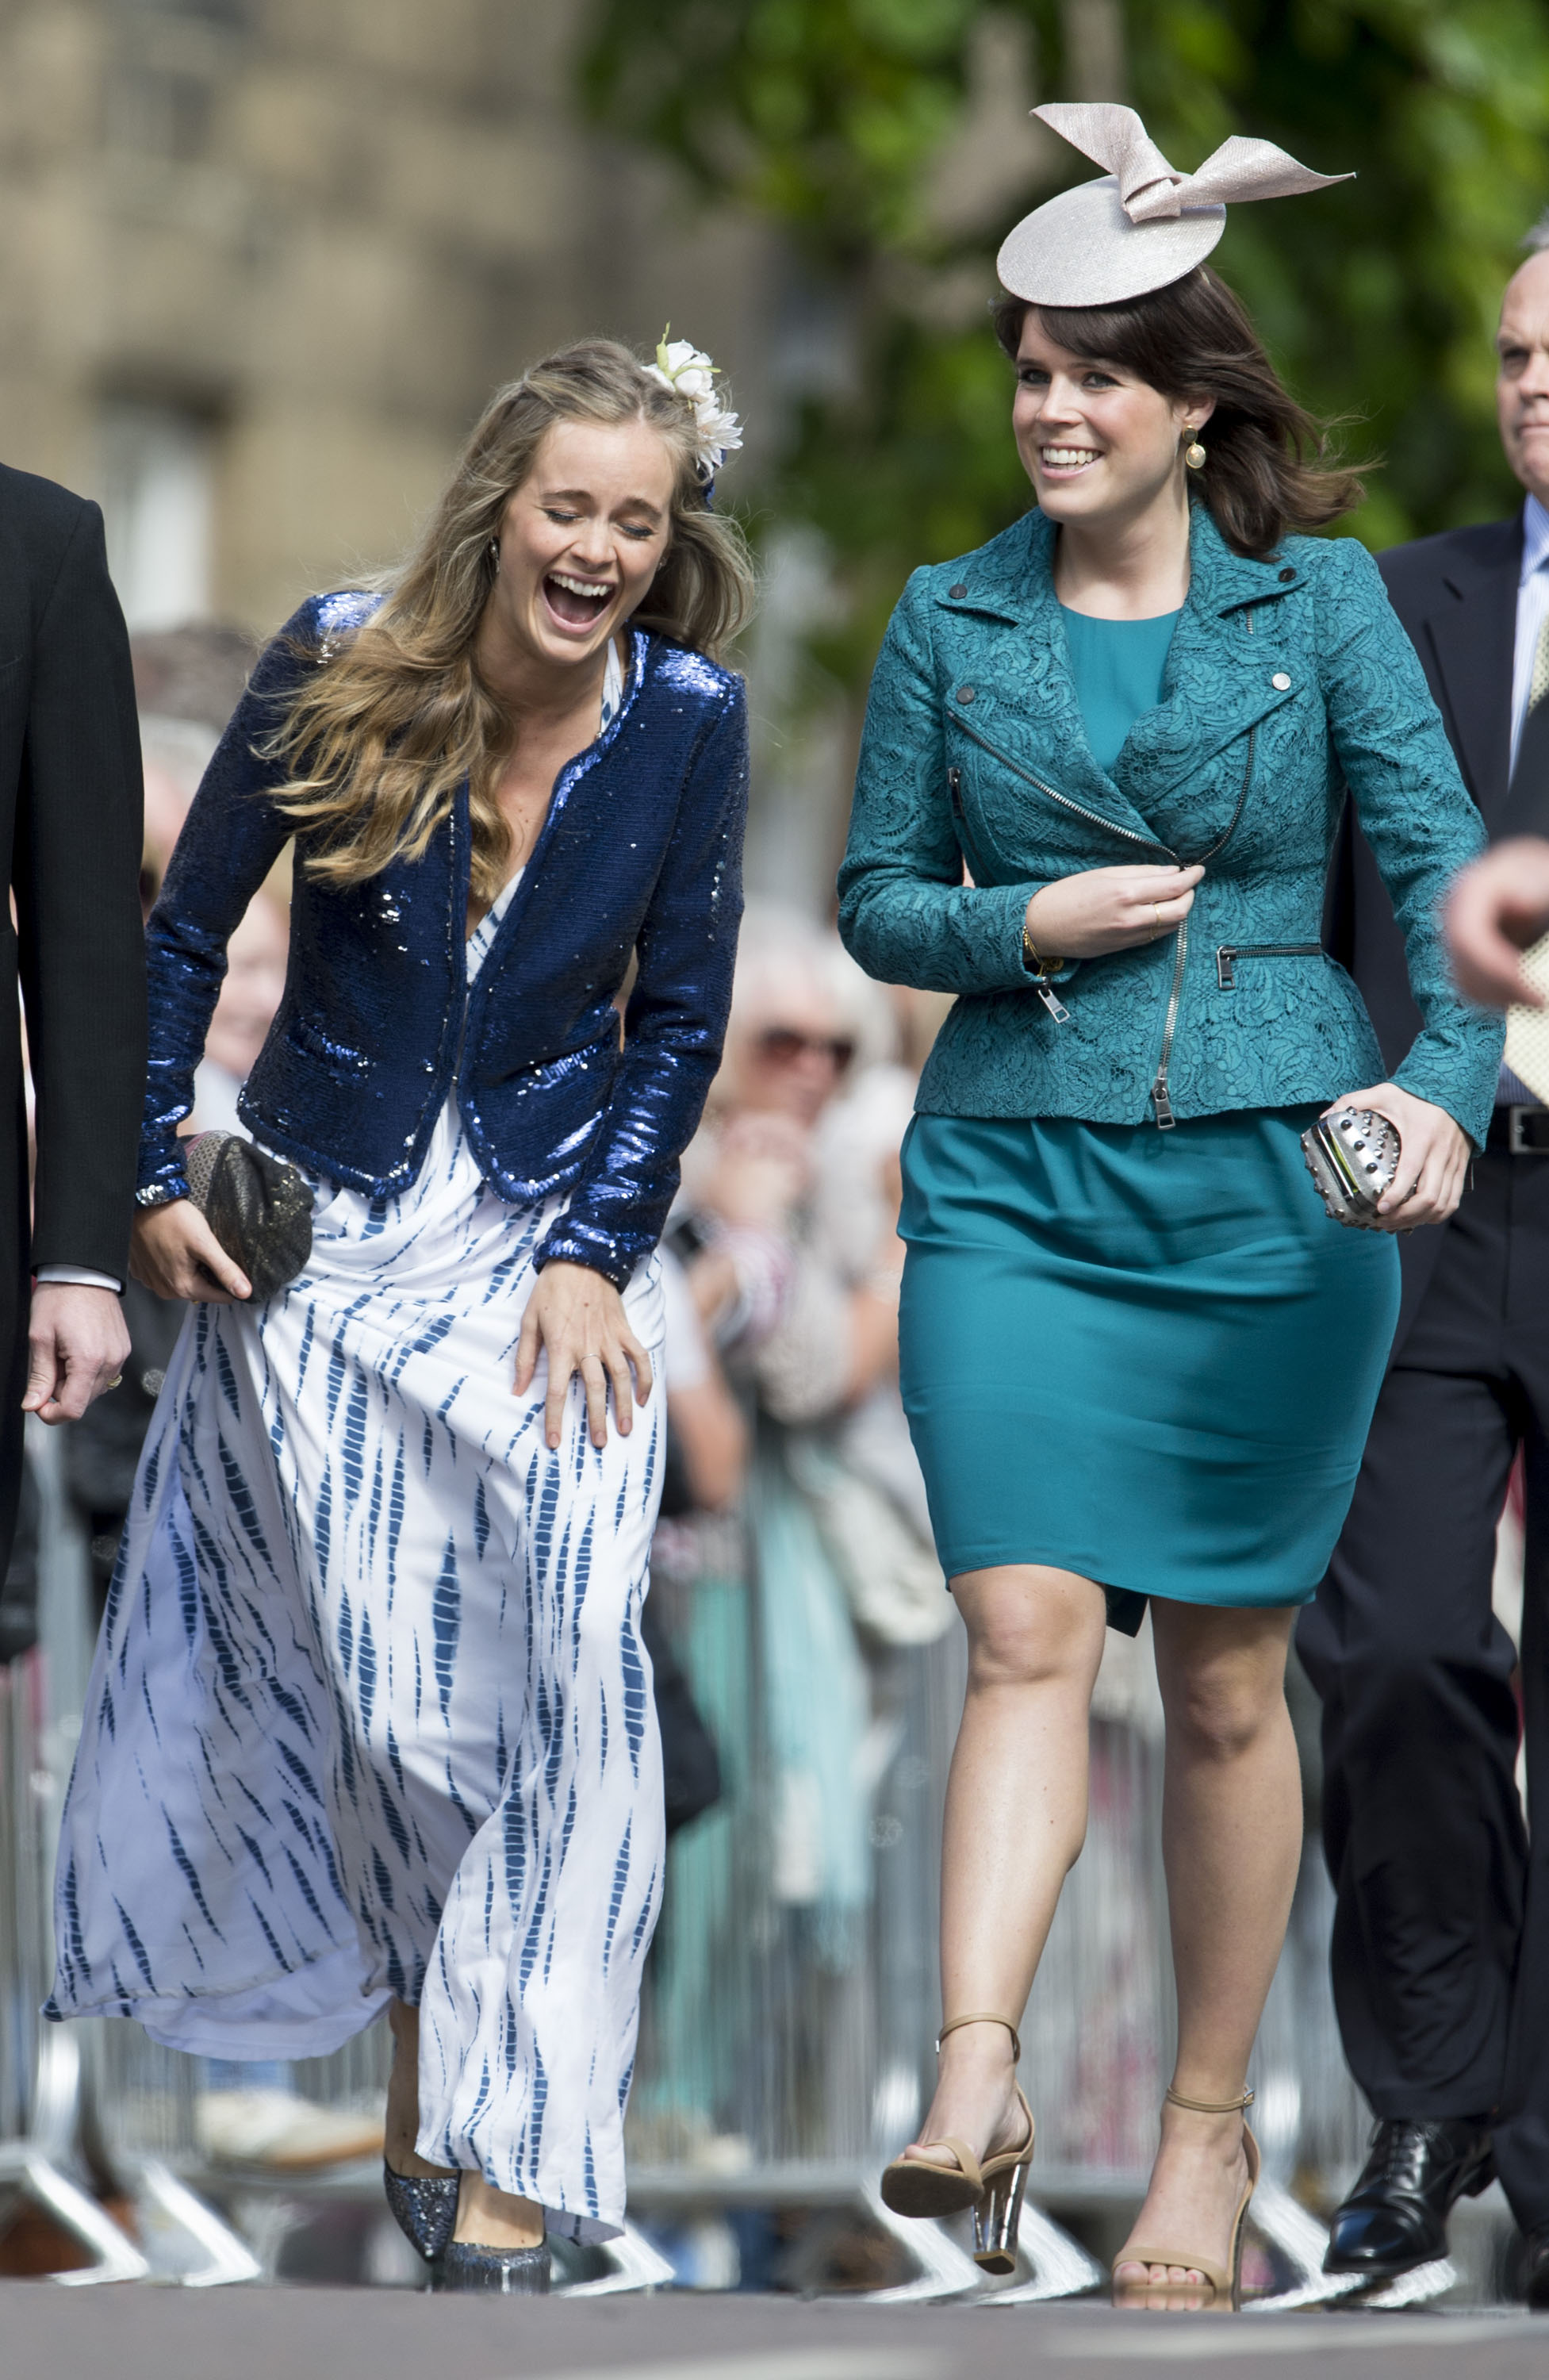 Cressida Bonas and Princess Eugenie attend the wedding of Melissa Percy and Thomas van Straubenzee at Alnwick Castle on June 22, 2013 in Alnwick, England. | Source: Getty Images